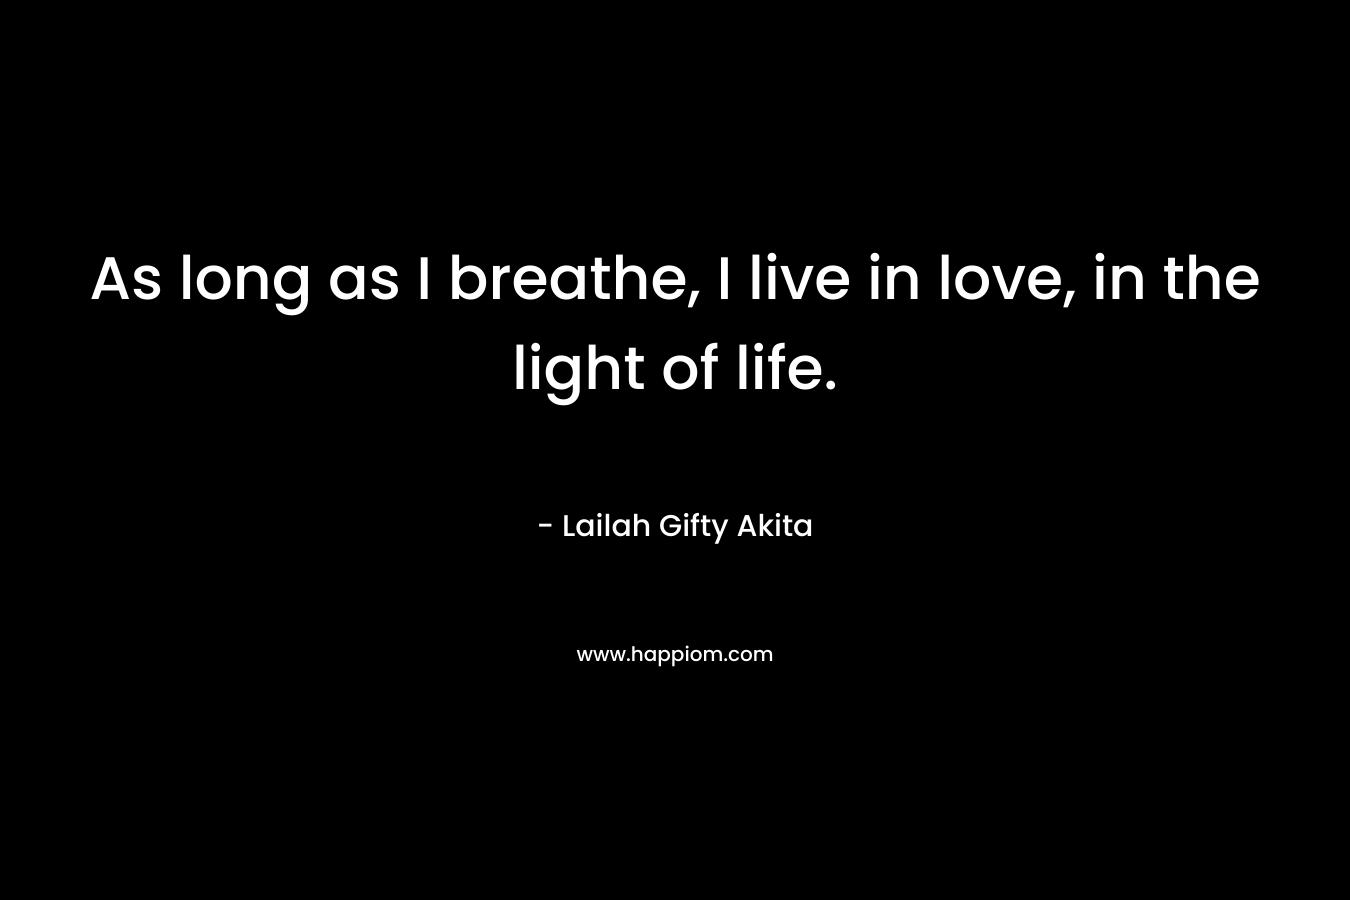 As long as I breathe, I live in love, in the light of life.